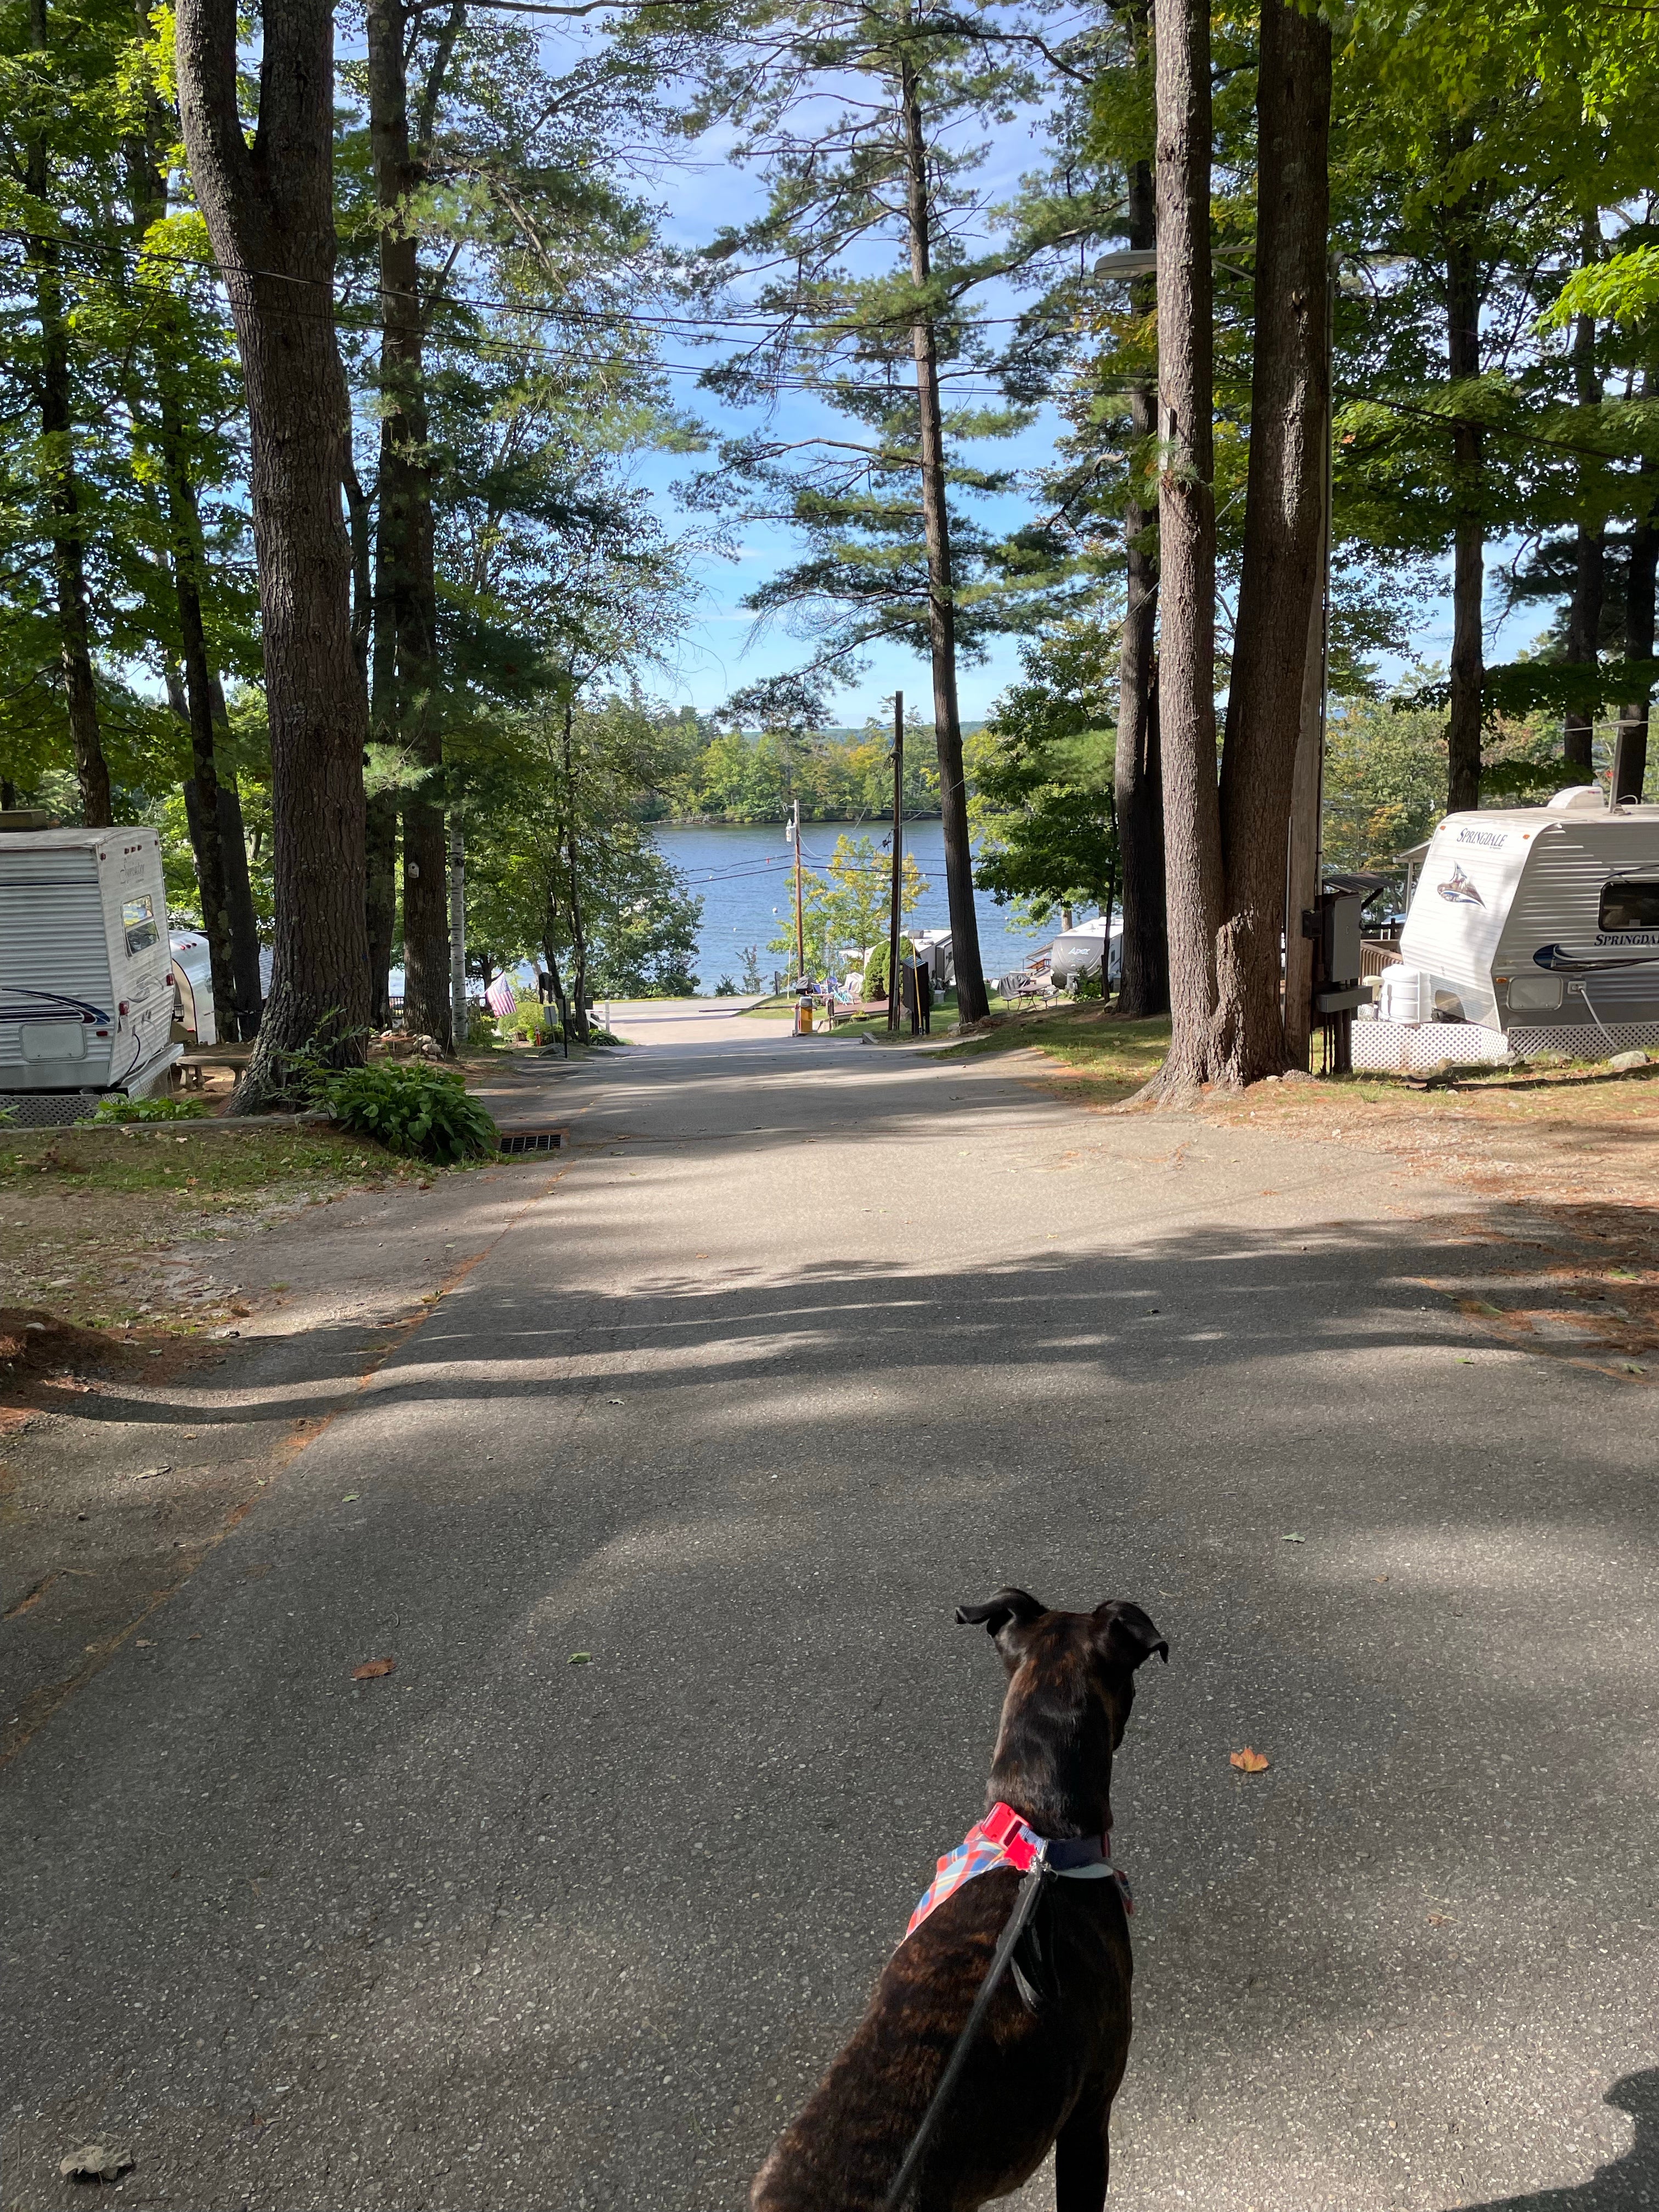 Camper submitted image from Long Island Bridge Campground - 5